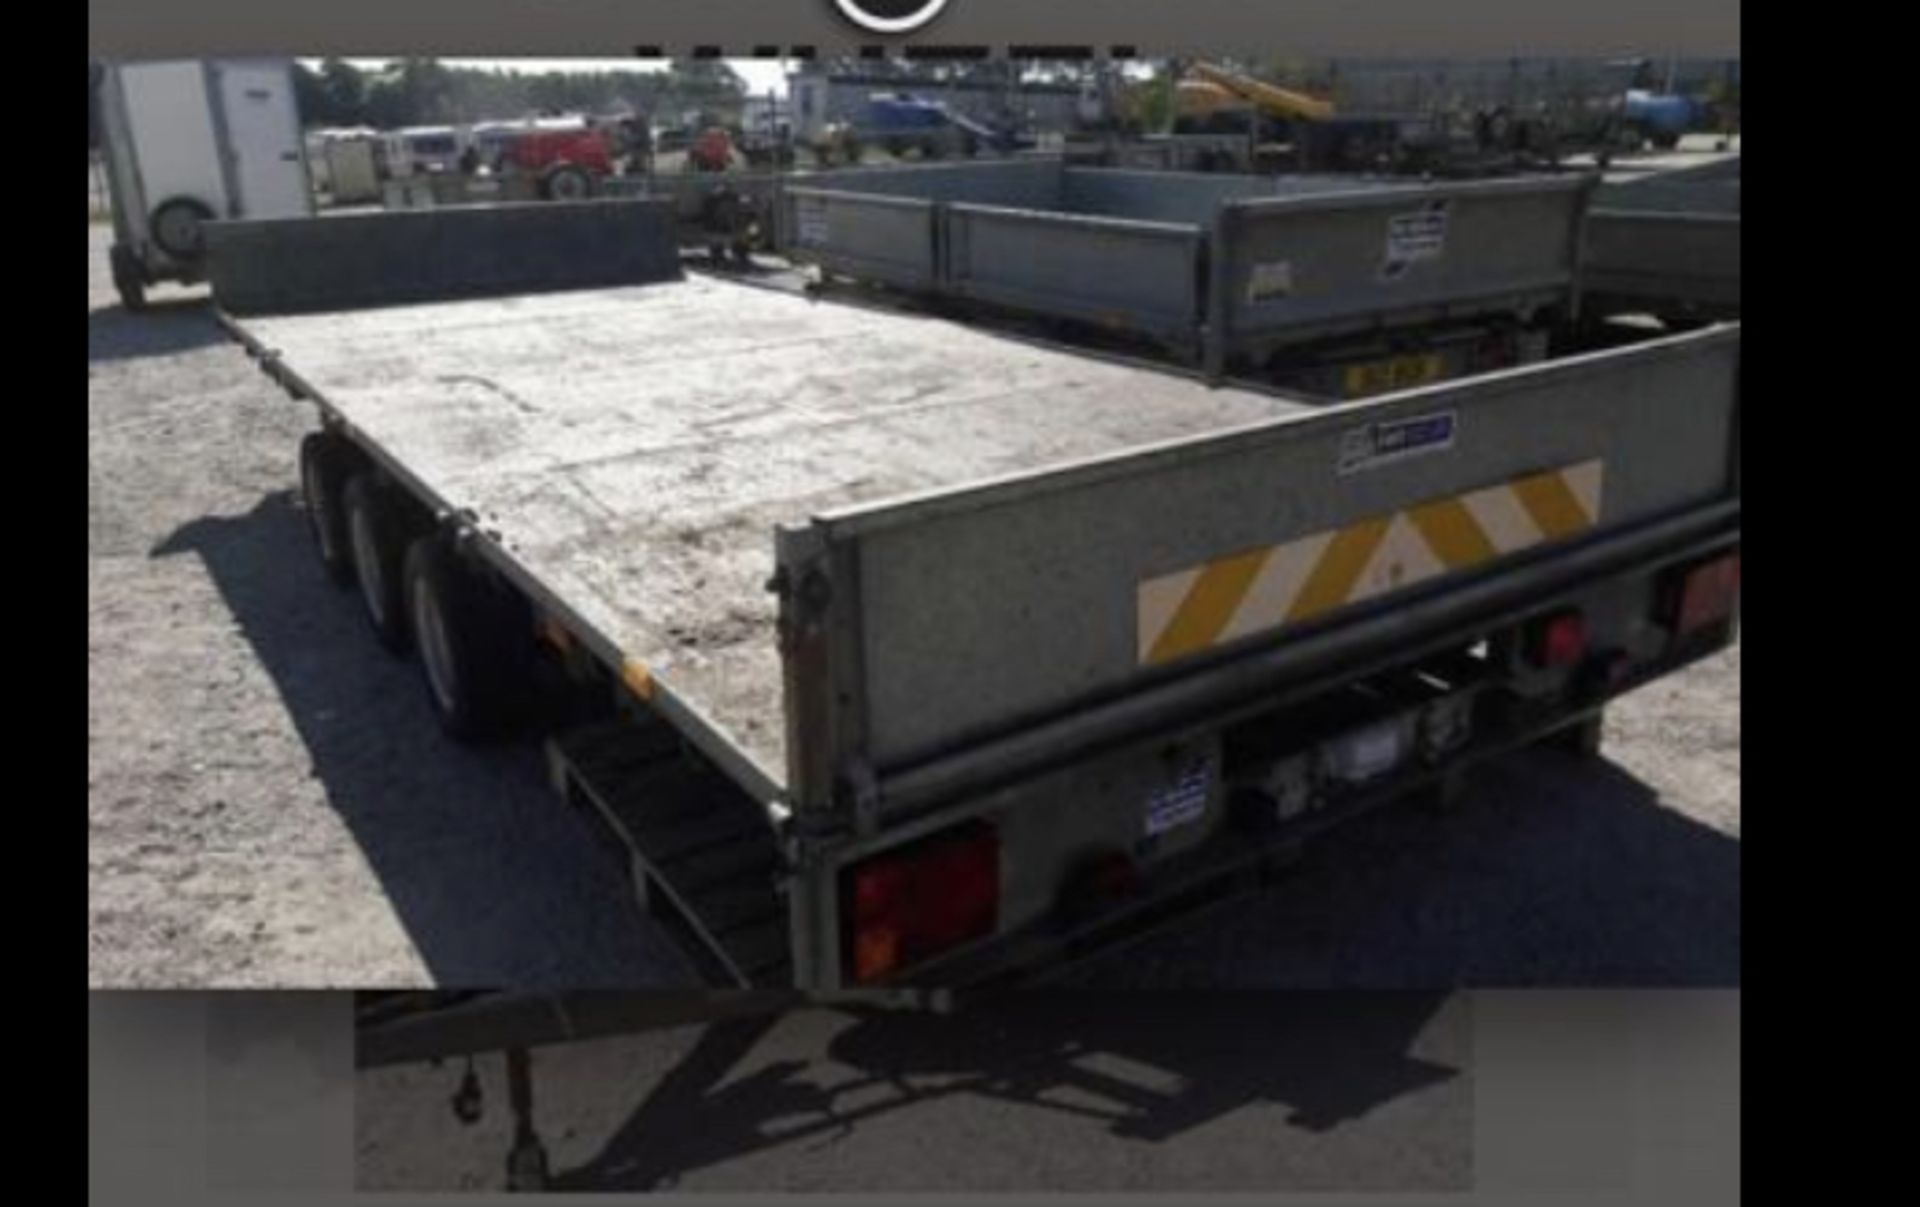 IFOR WILLIAMS LM187G TRI AXLE FLATBED PLANT TRAILER 3.5T LOCATION: SCOTLAND - Image 7 of 7